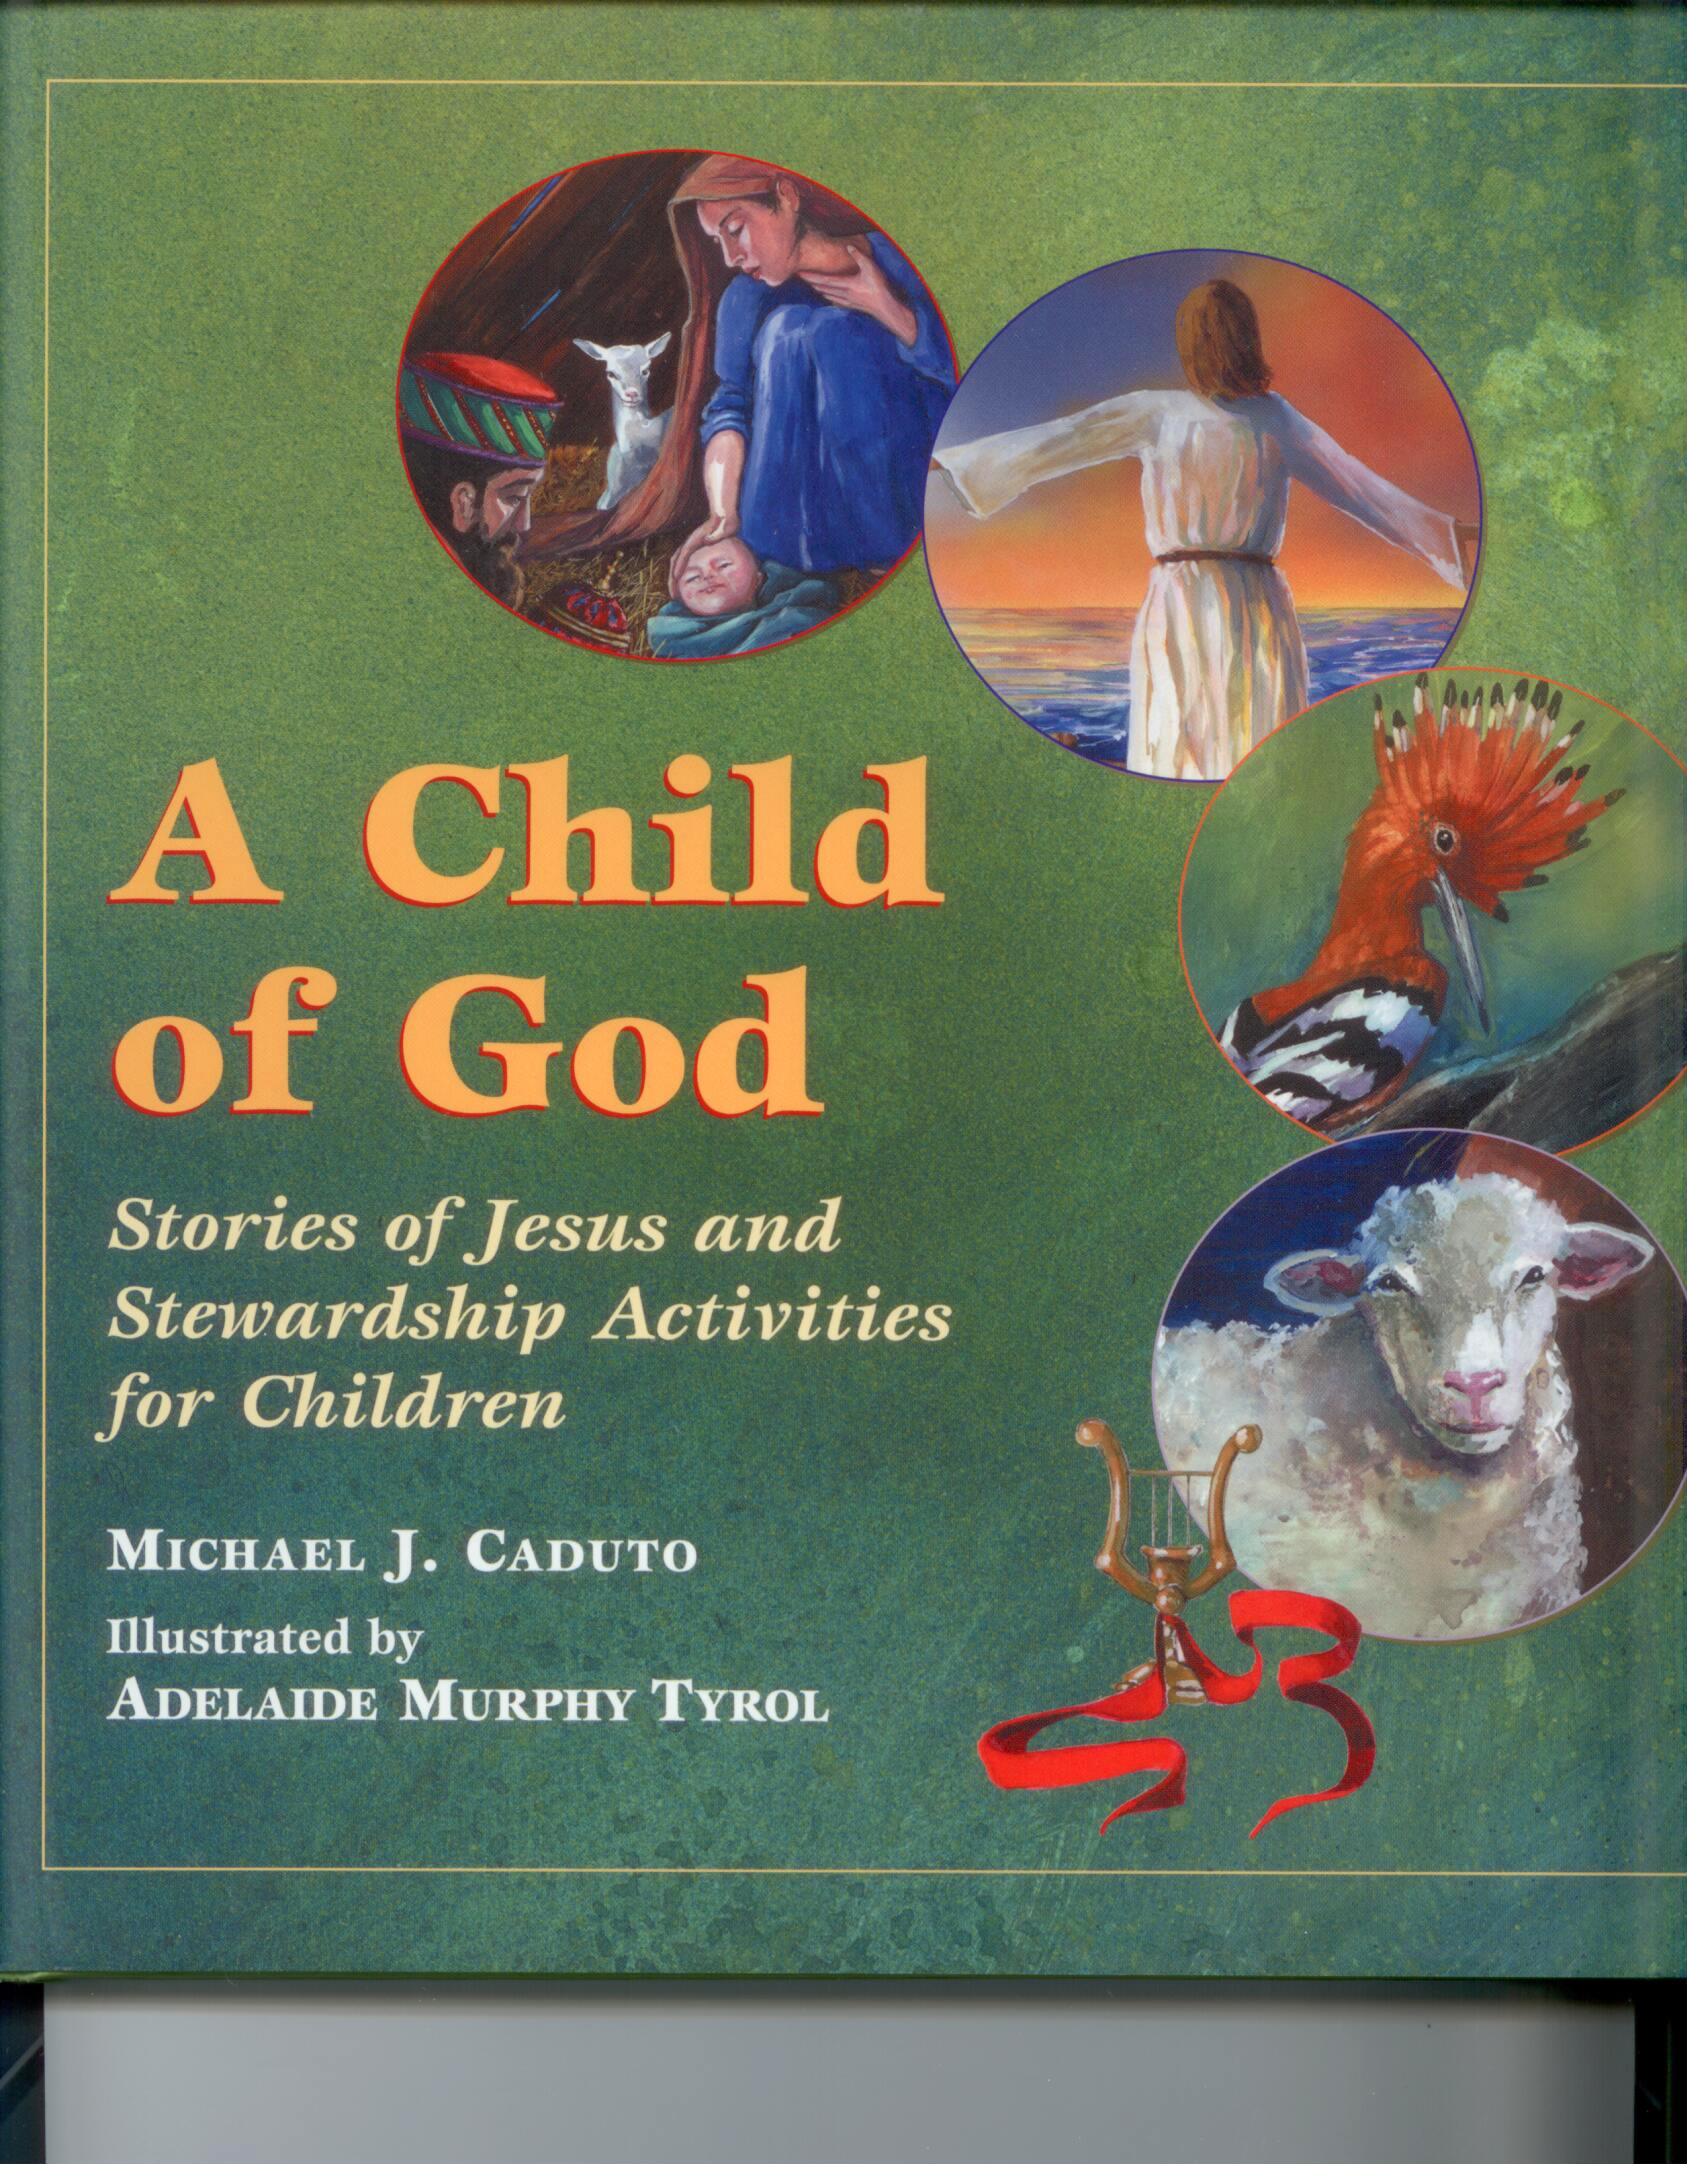 A Child of God: Stories of Jesus and Stewardship Activities for Children Michael J. Cadutto